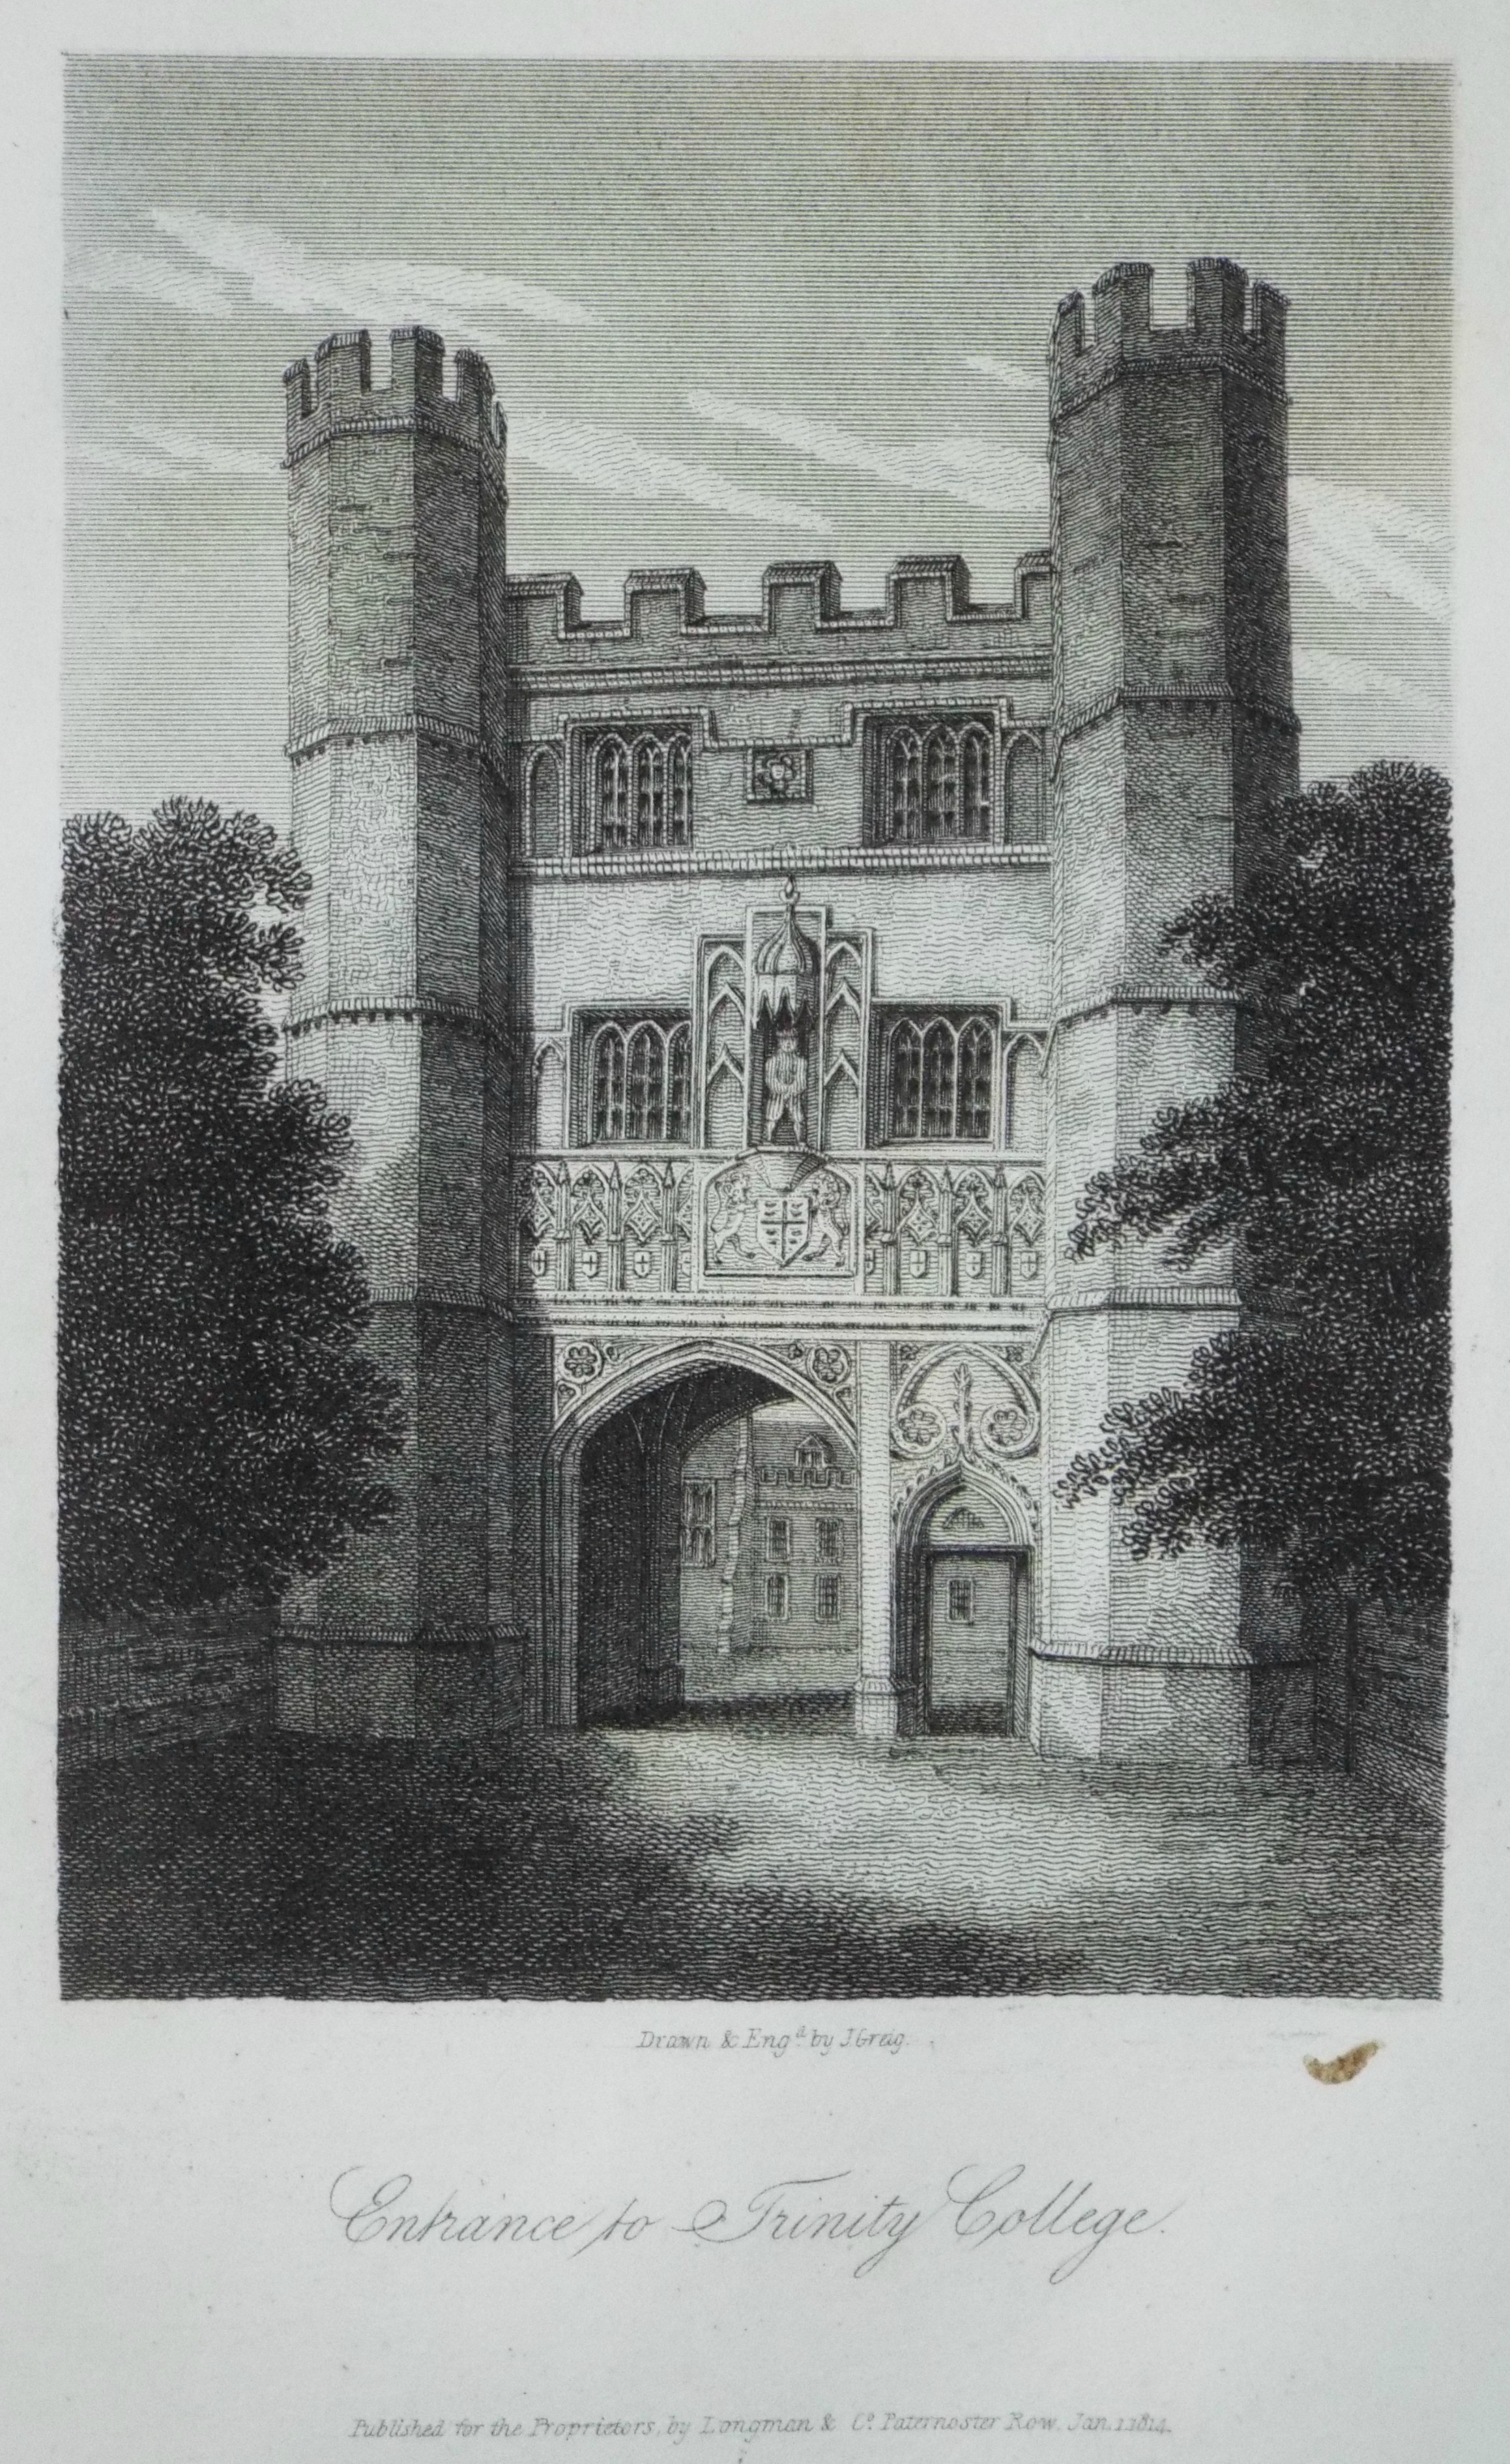 Print - Entrance to Trinity College. - Greig